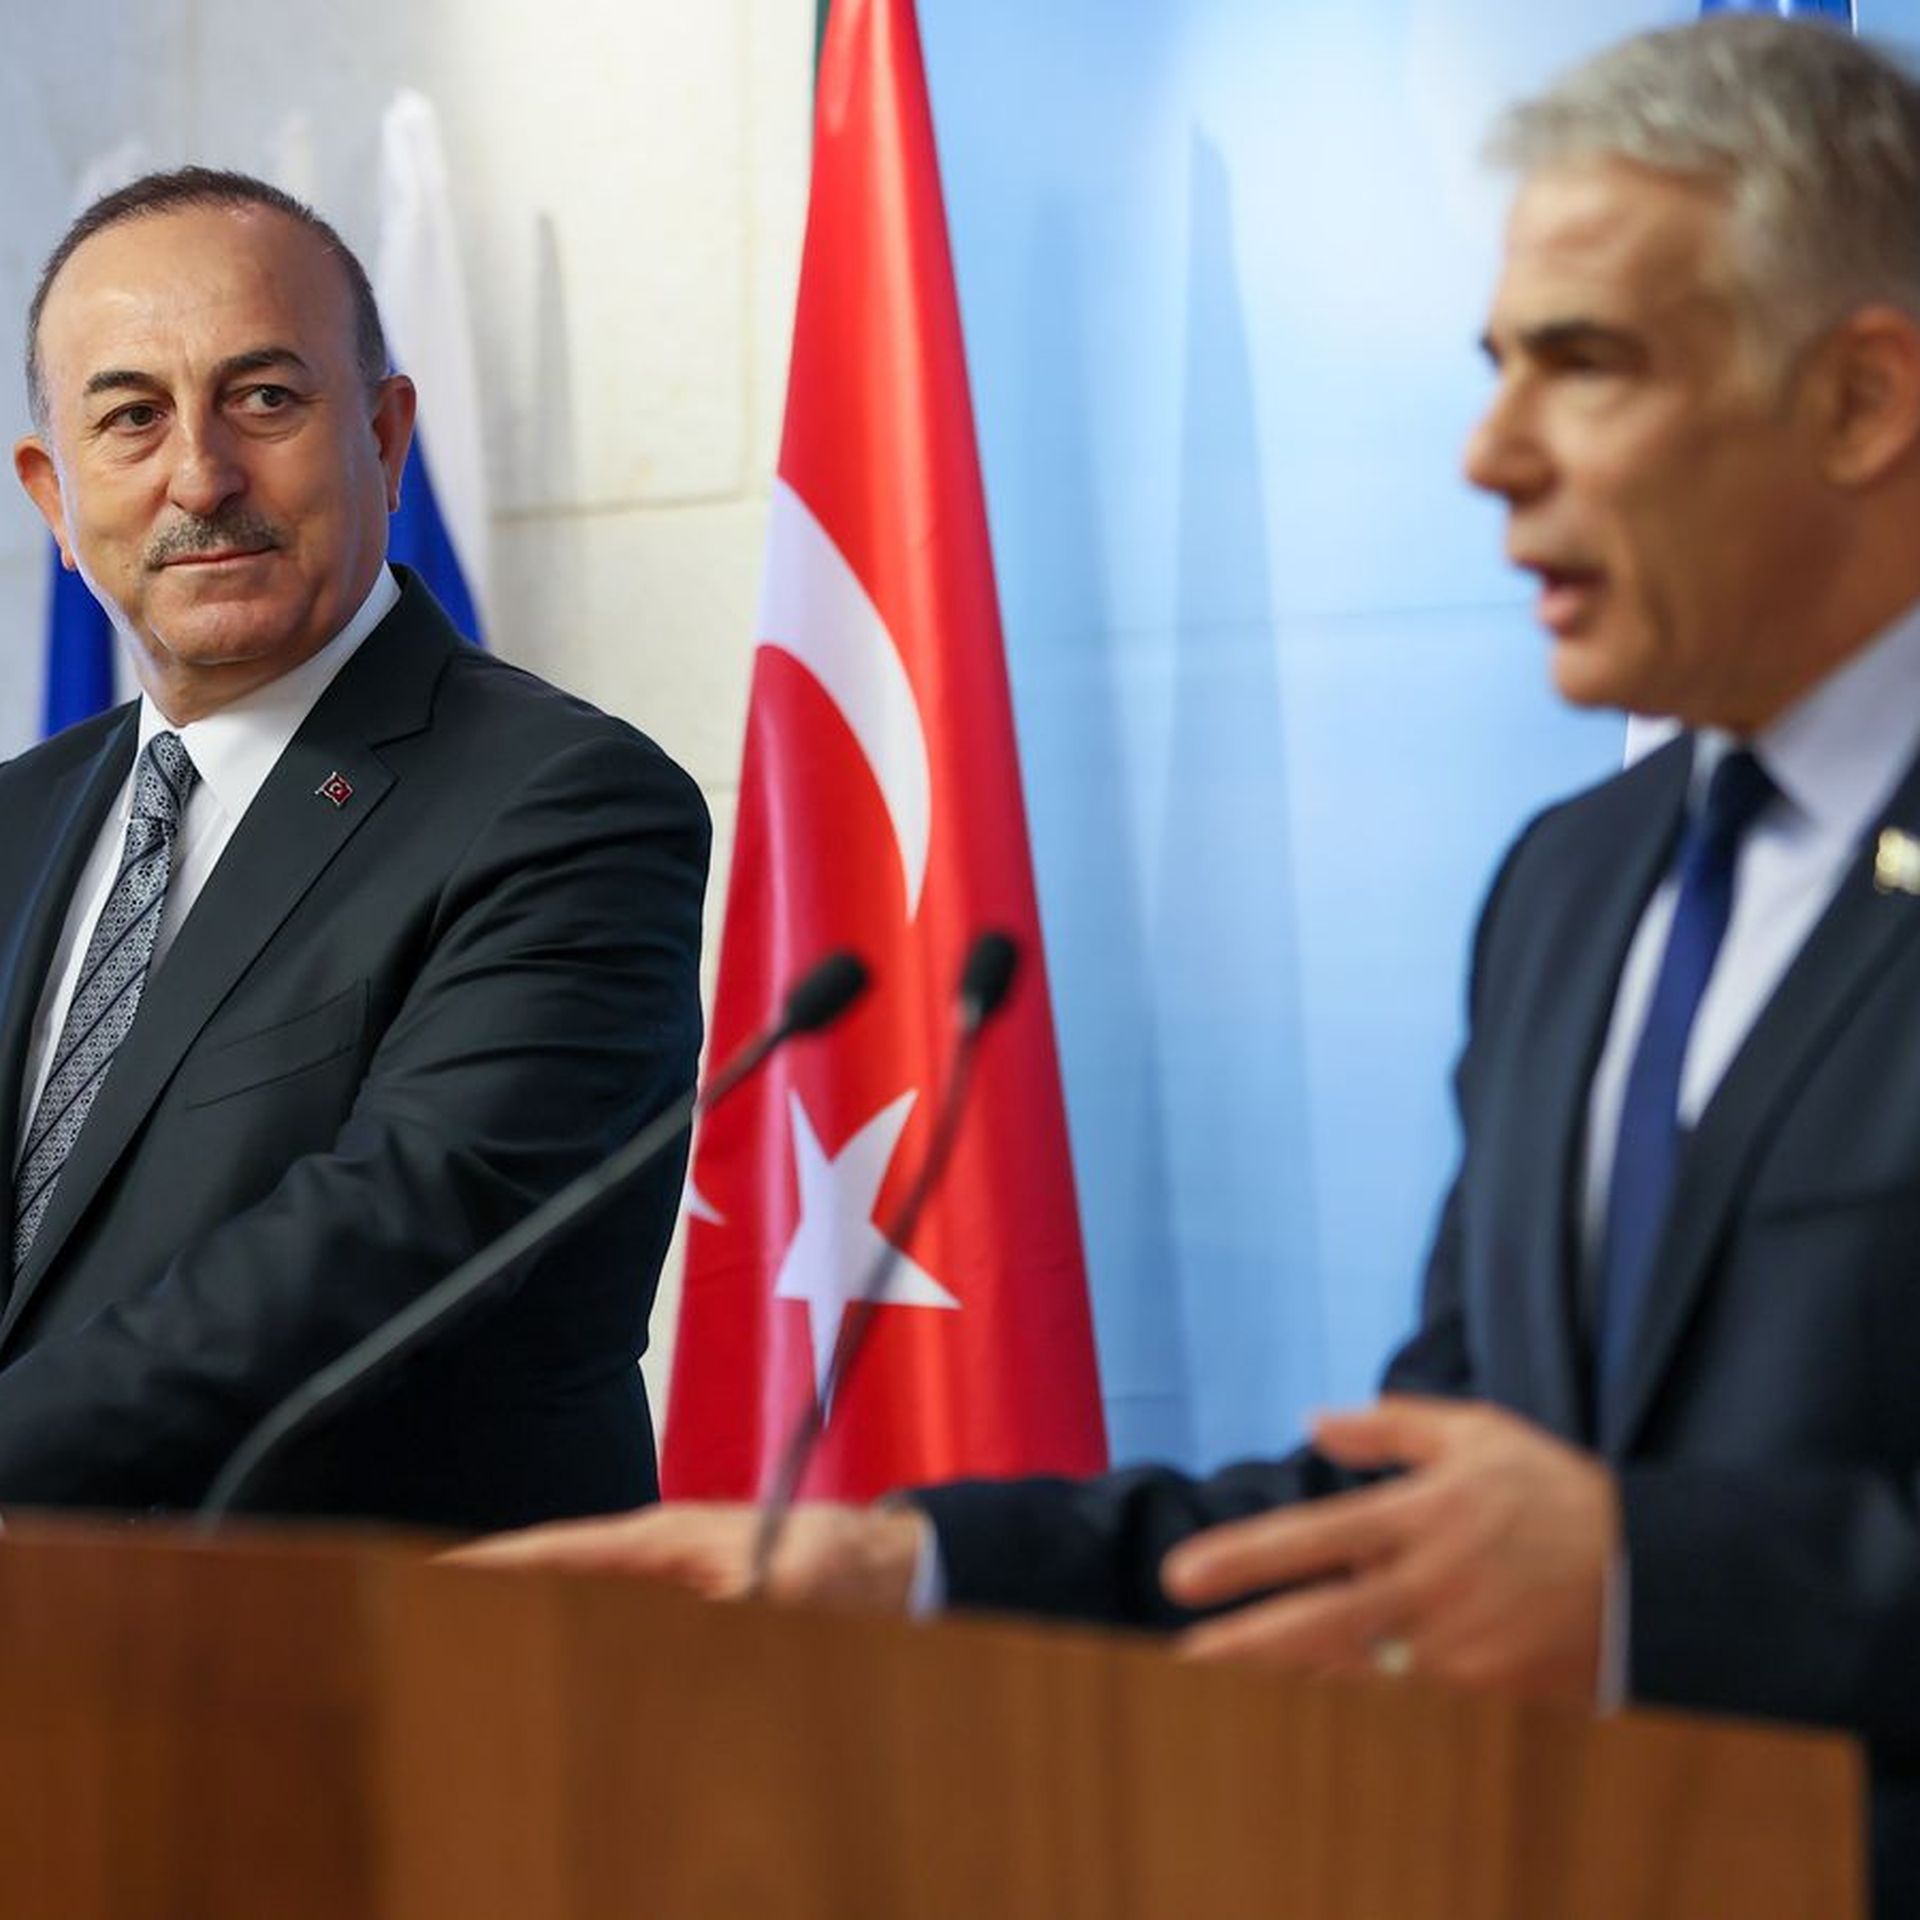 Turkish Foreign Minister Mevlüt Çavuşoğlu (left) and Israeli Foreign Minister Yair Lapid on May 25. Photo: Cem Ozdel/Anadolu Agency via Getty Images